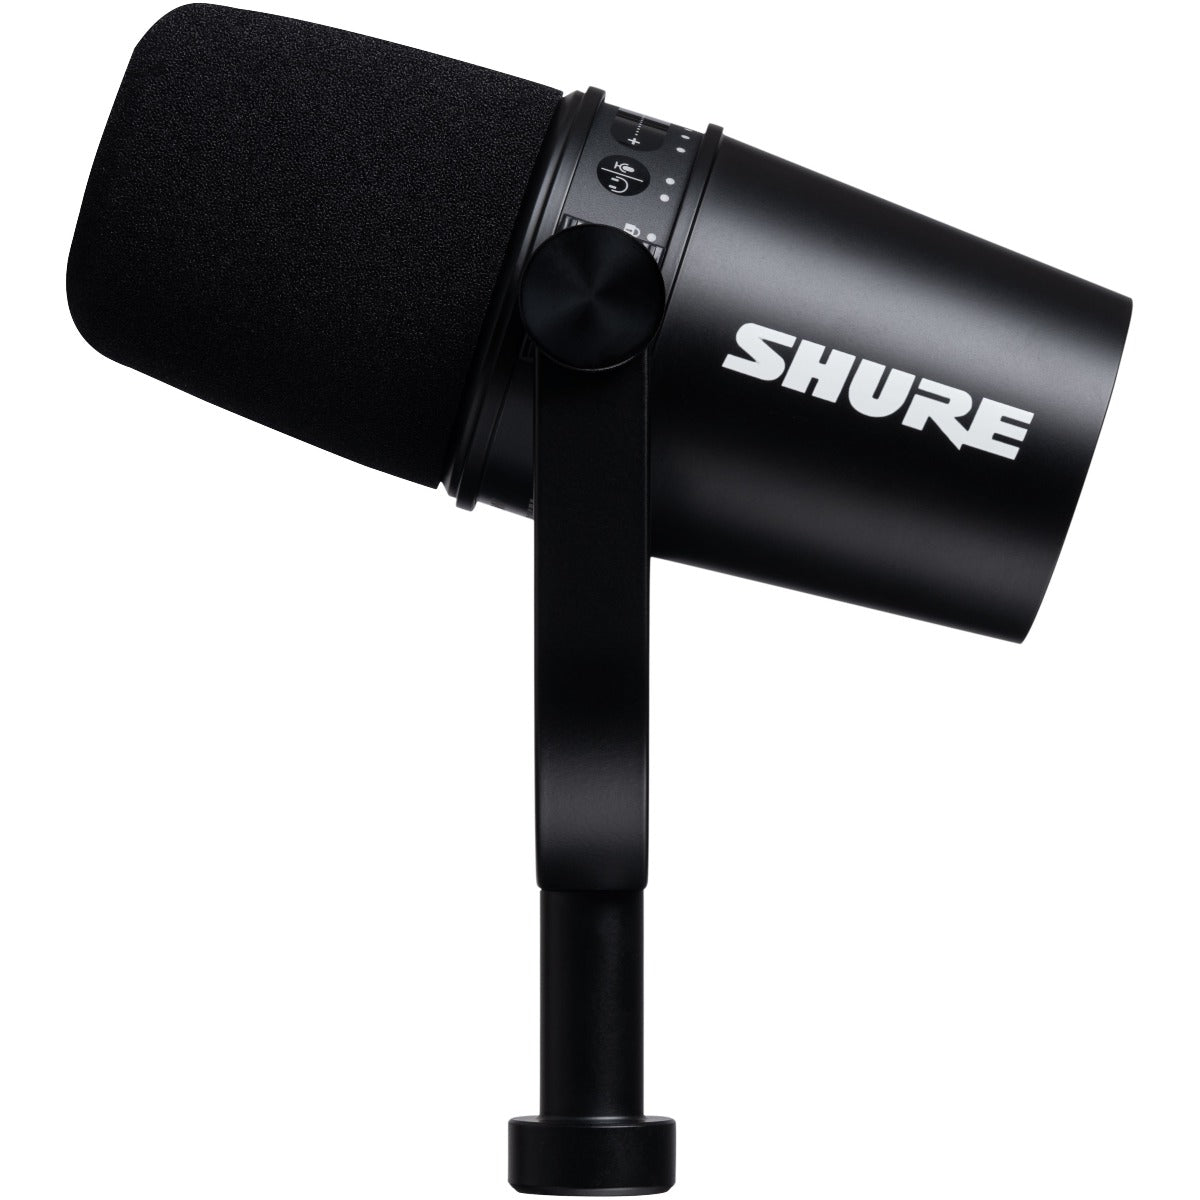 Shure MV7 Podcast Microphone Kit with Mic Stand and Headphones